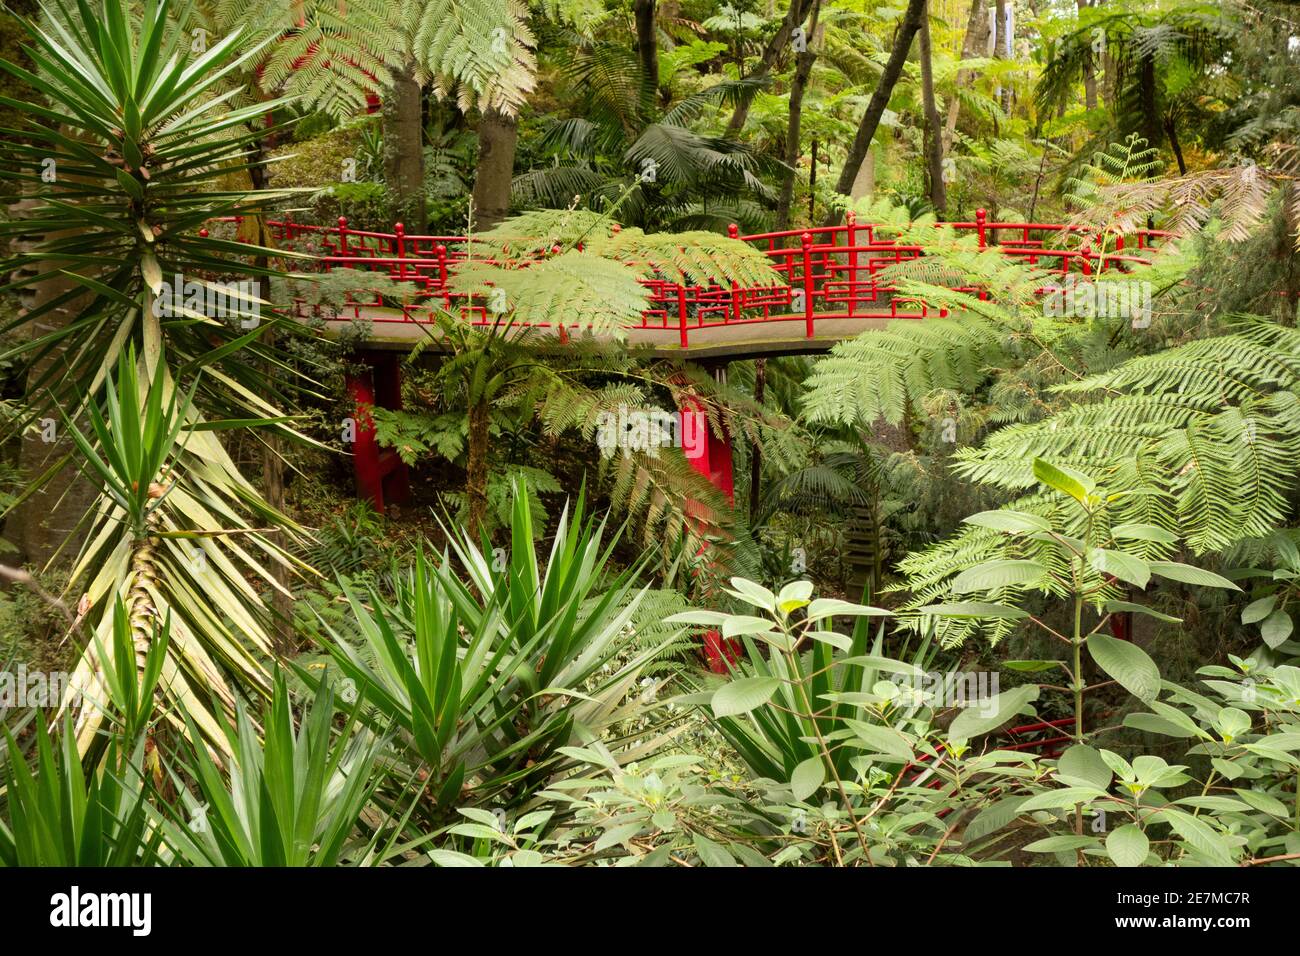 raised walkway with red oriental railings in the Southern Oriental garden in the Monte Palace Tropical Garden Stock Photo